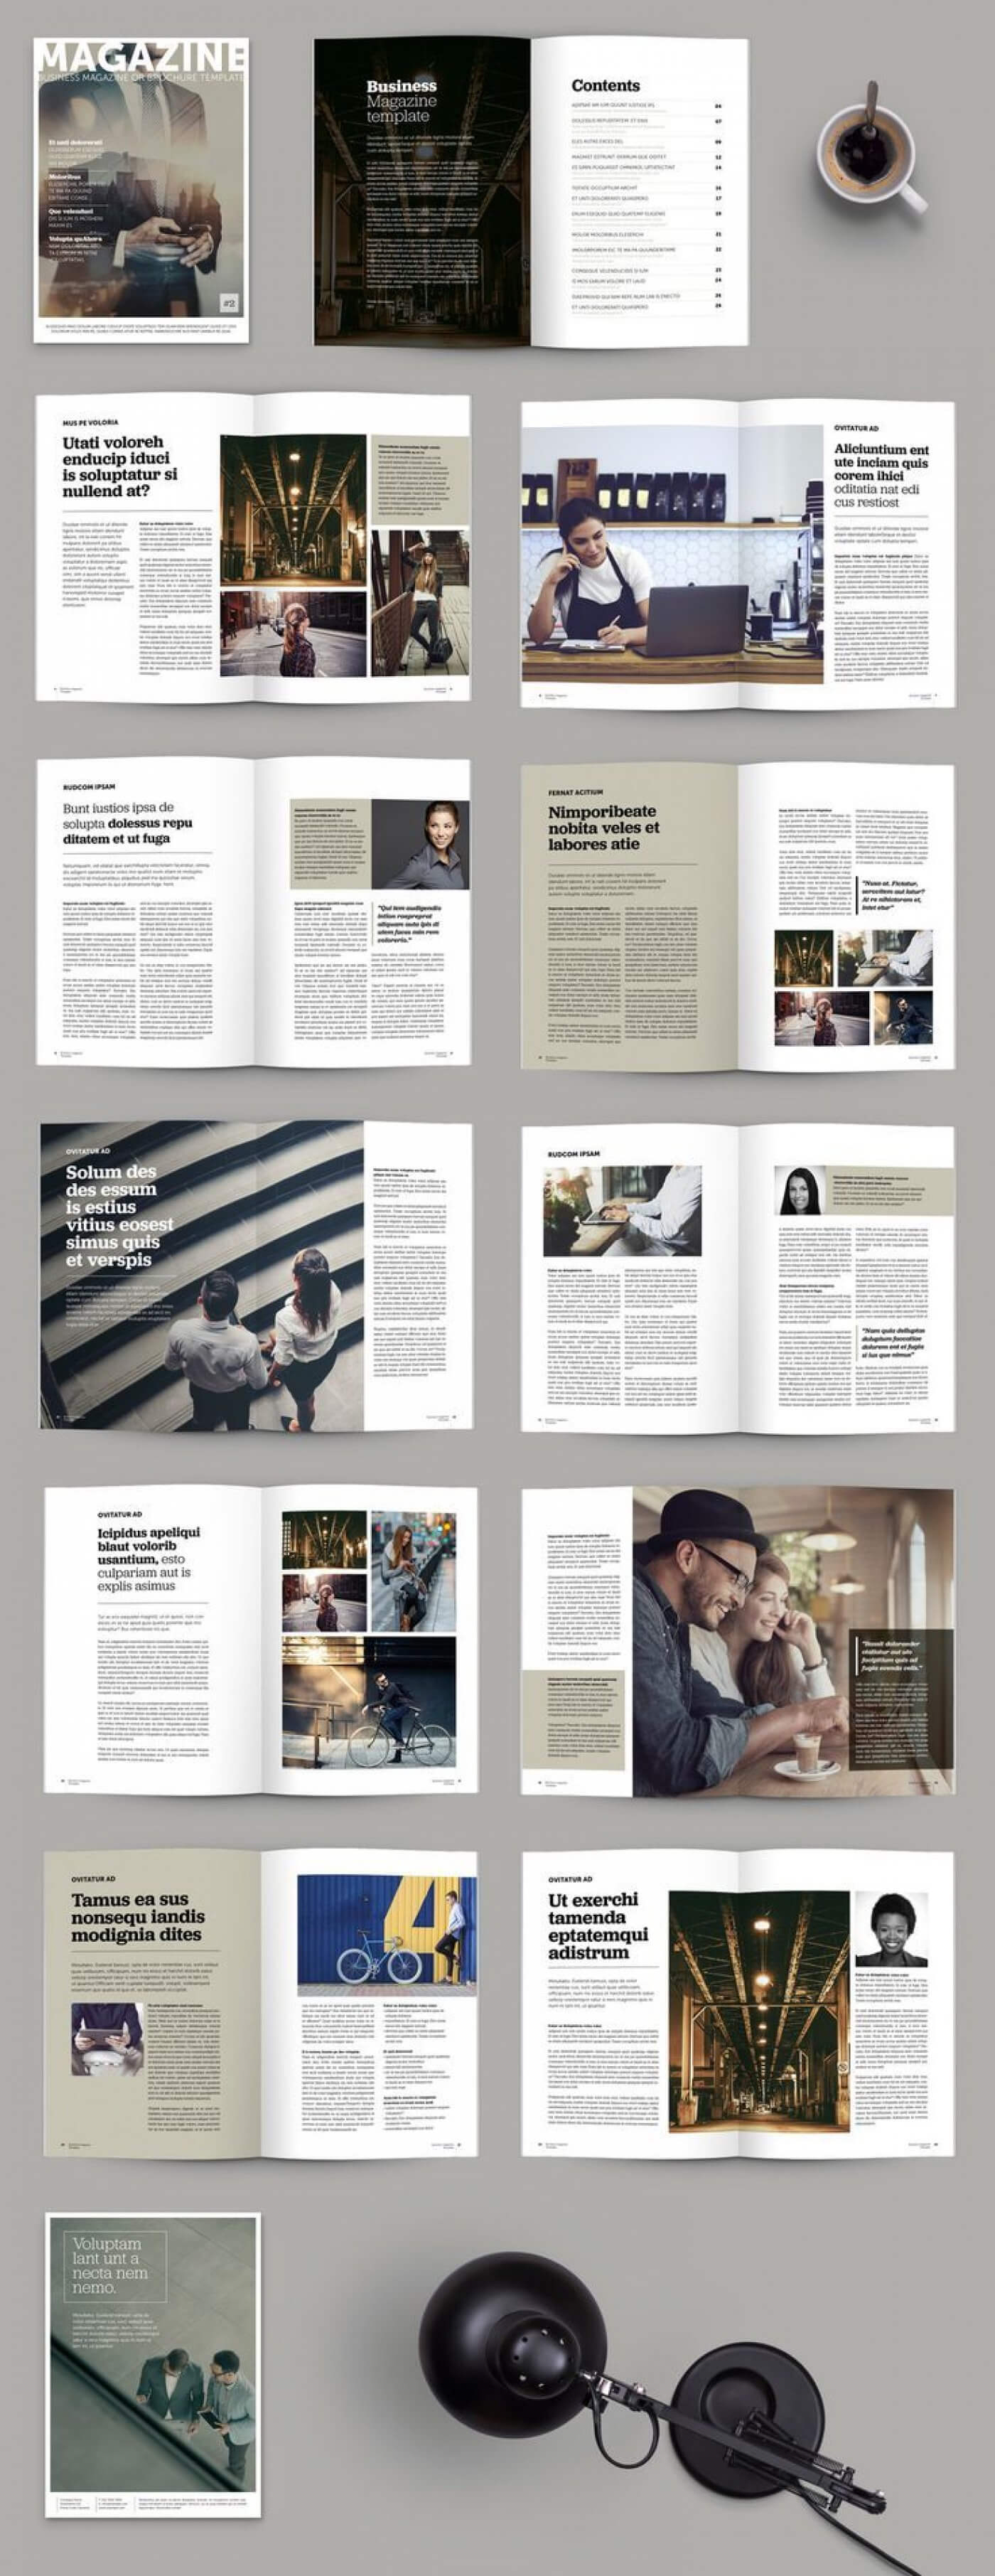 018 Template Ideas Magazine Free Remarkable Word WordPress Regarding Magazine Ad Template Word